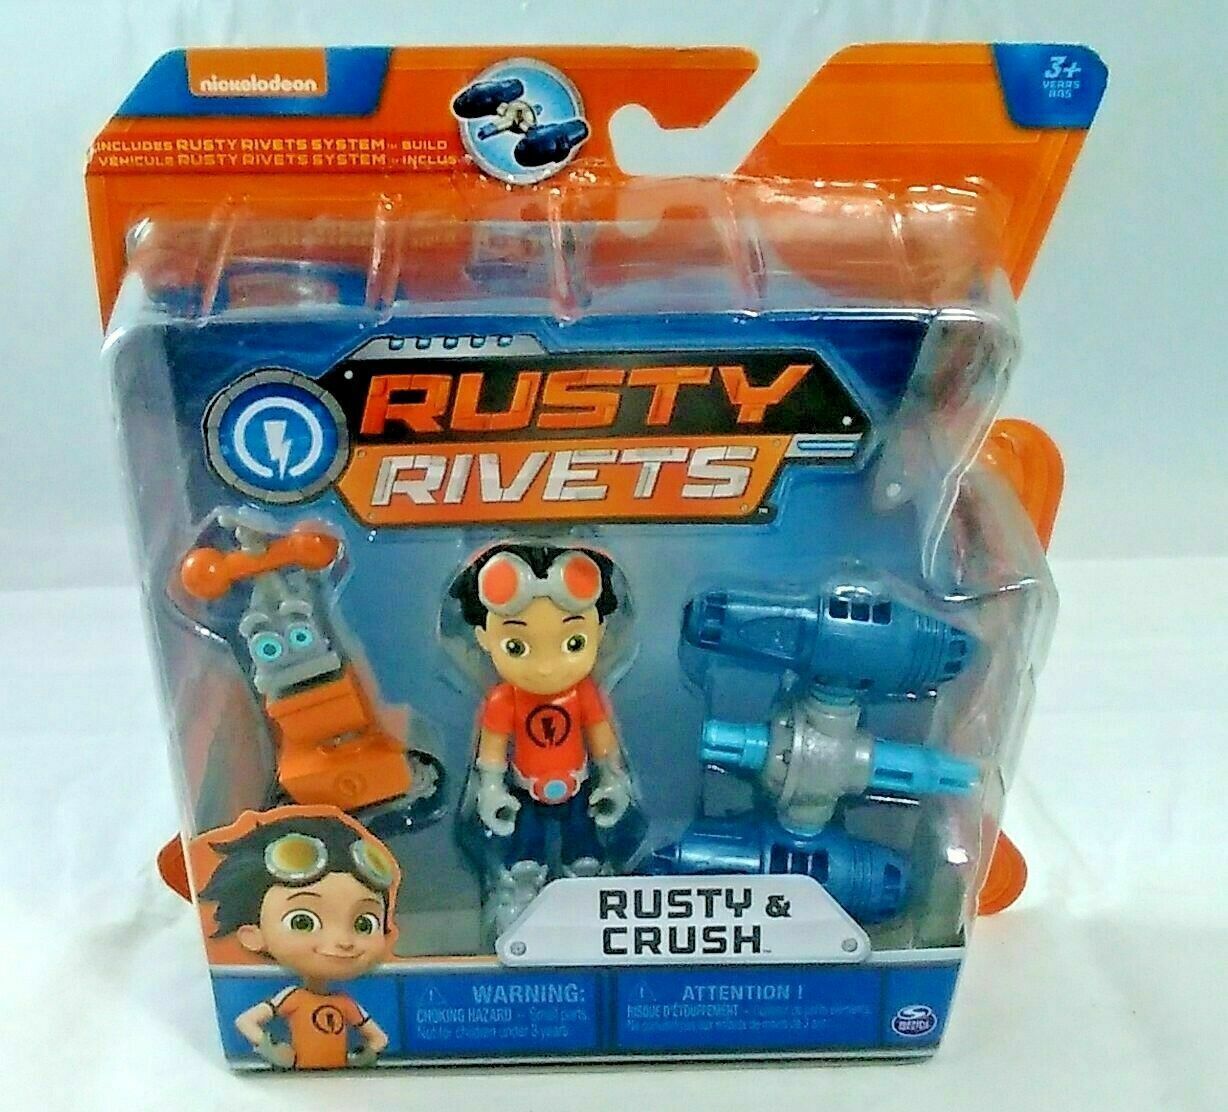 Primary image for Nickelodeon Rusty Rivets Build Me Rivet System (Spin Master) Rusty & Crush